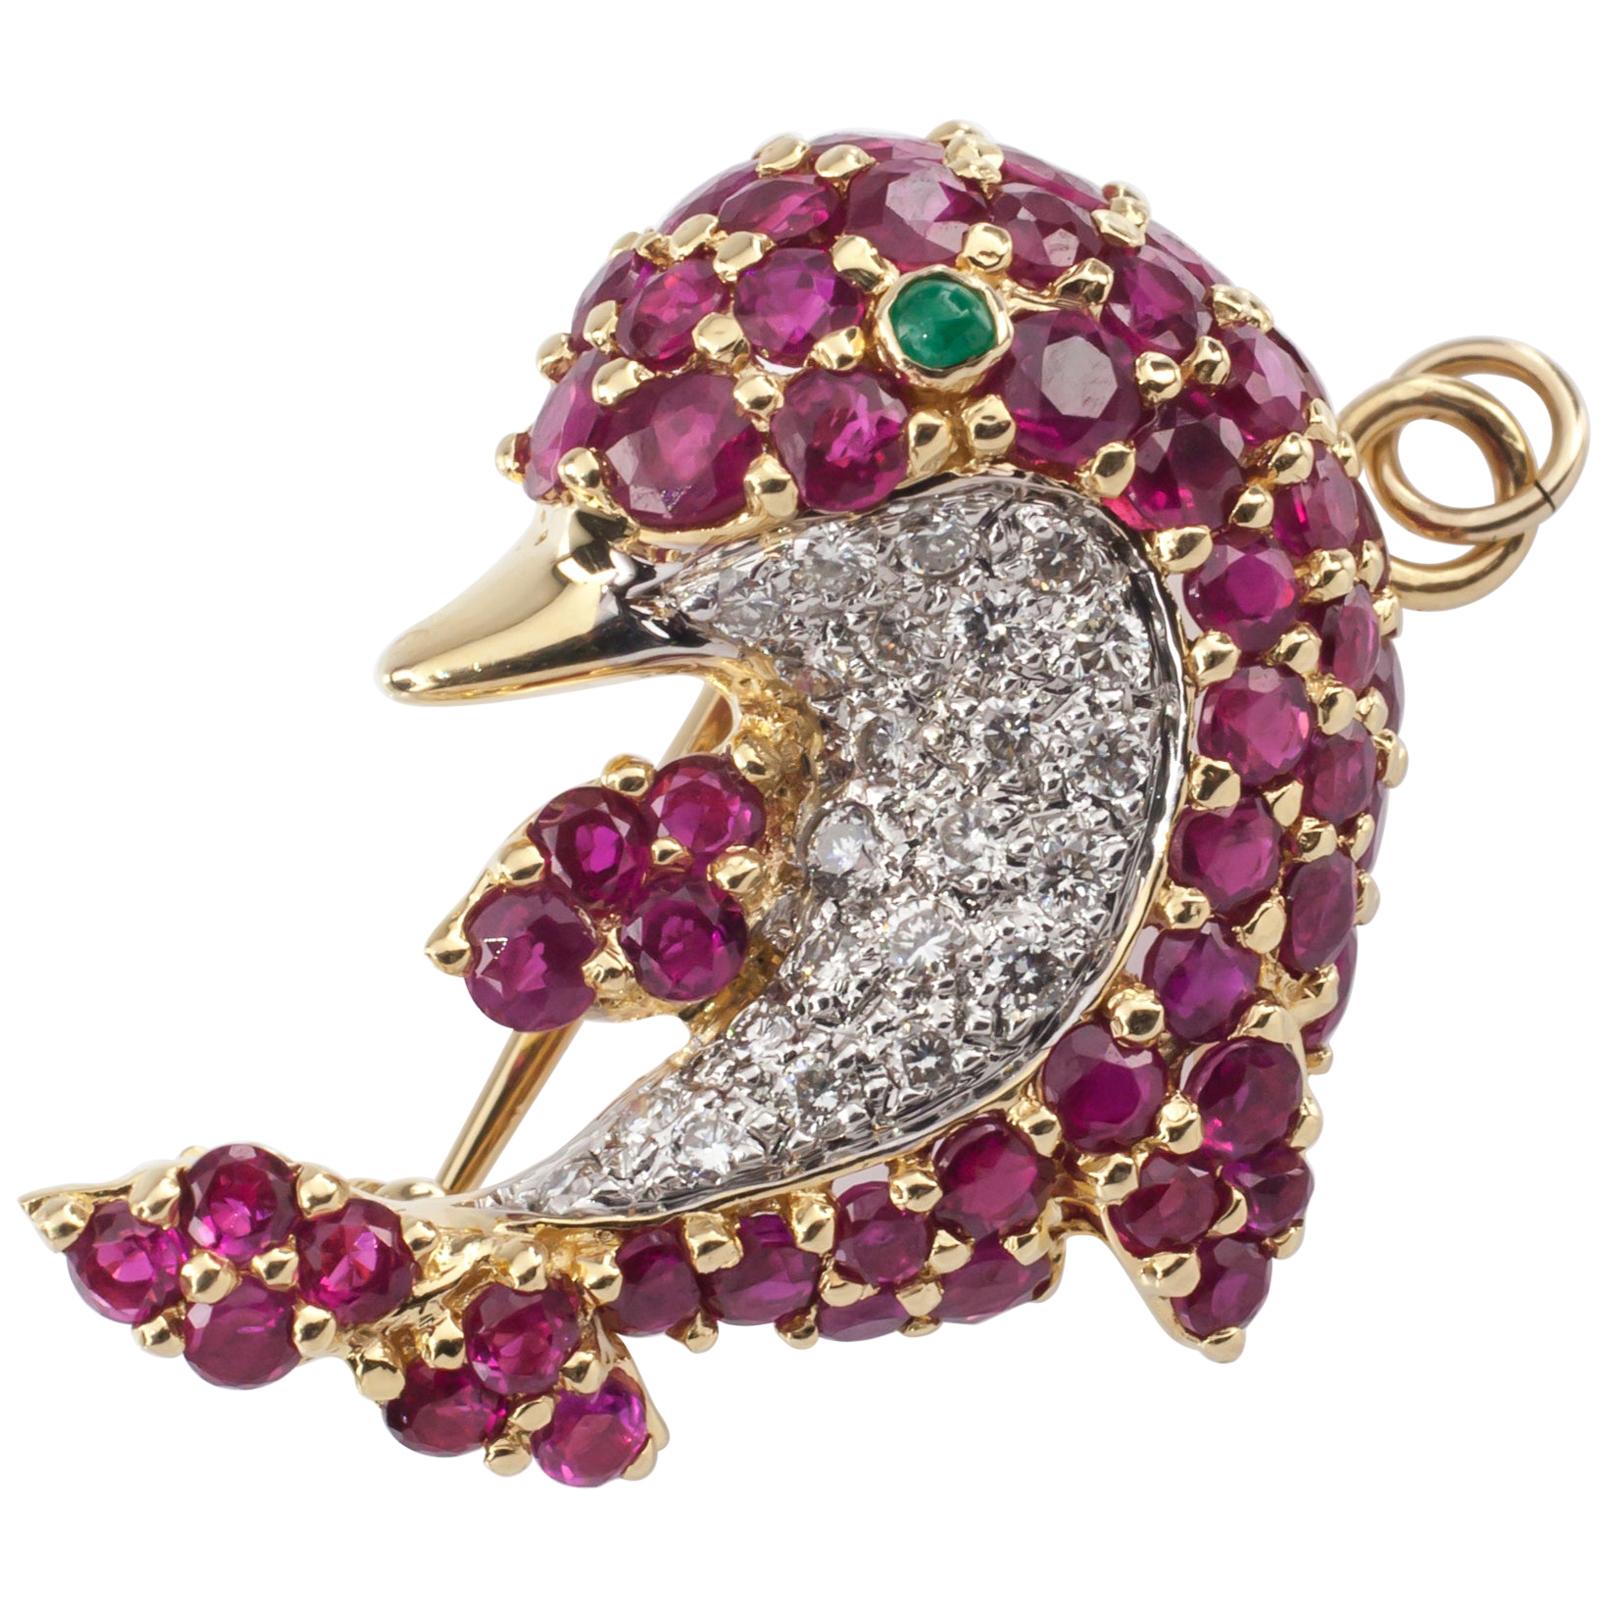 Le Vian Dolphin Pendant Brooch with Diamond and Ruby Set in 18 Karat Yellow Gold